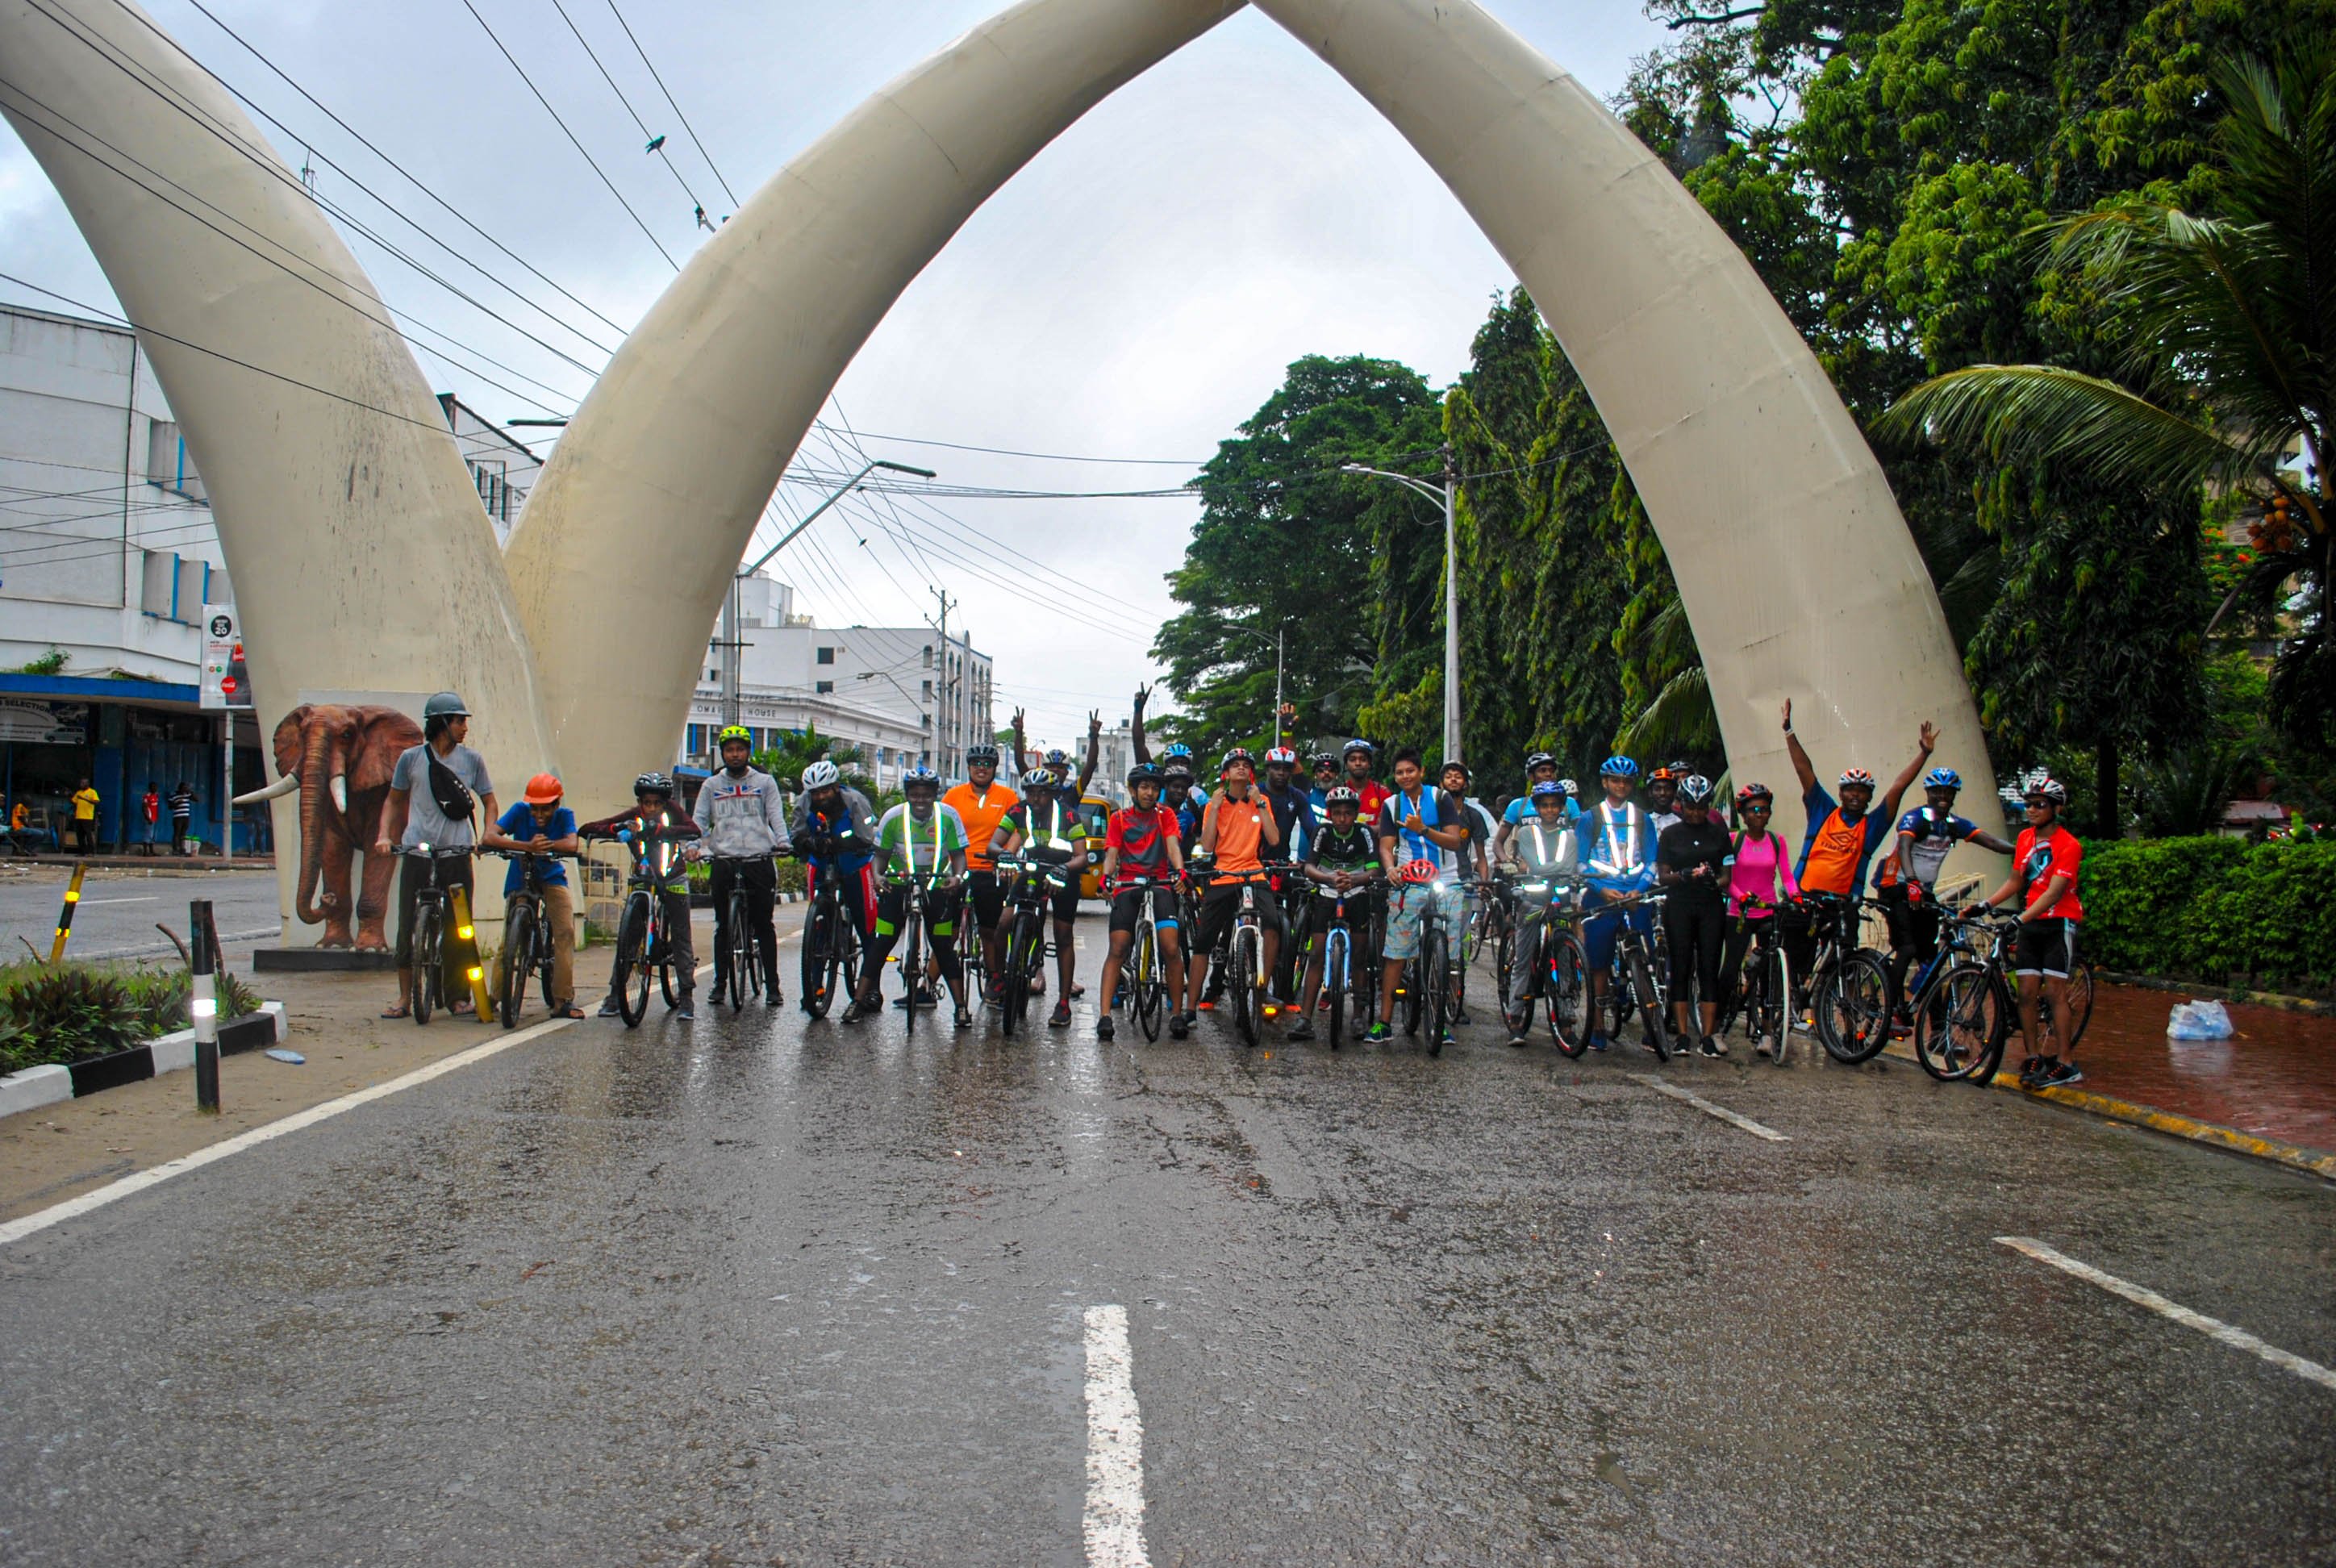 A Movement of a community of cyclists from coast of Kenya advocating for safety ,development of cycling friendly infrastructure and promote the sport in Mombasa